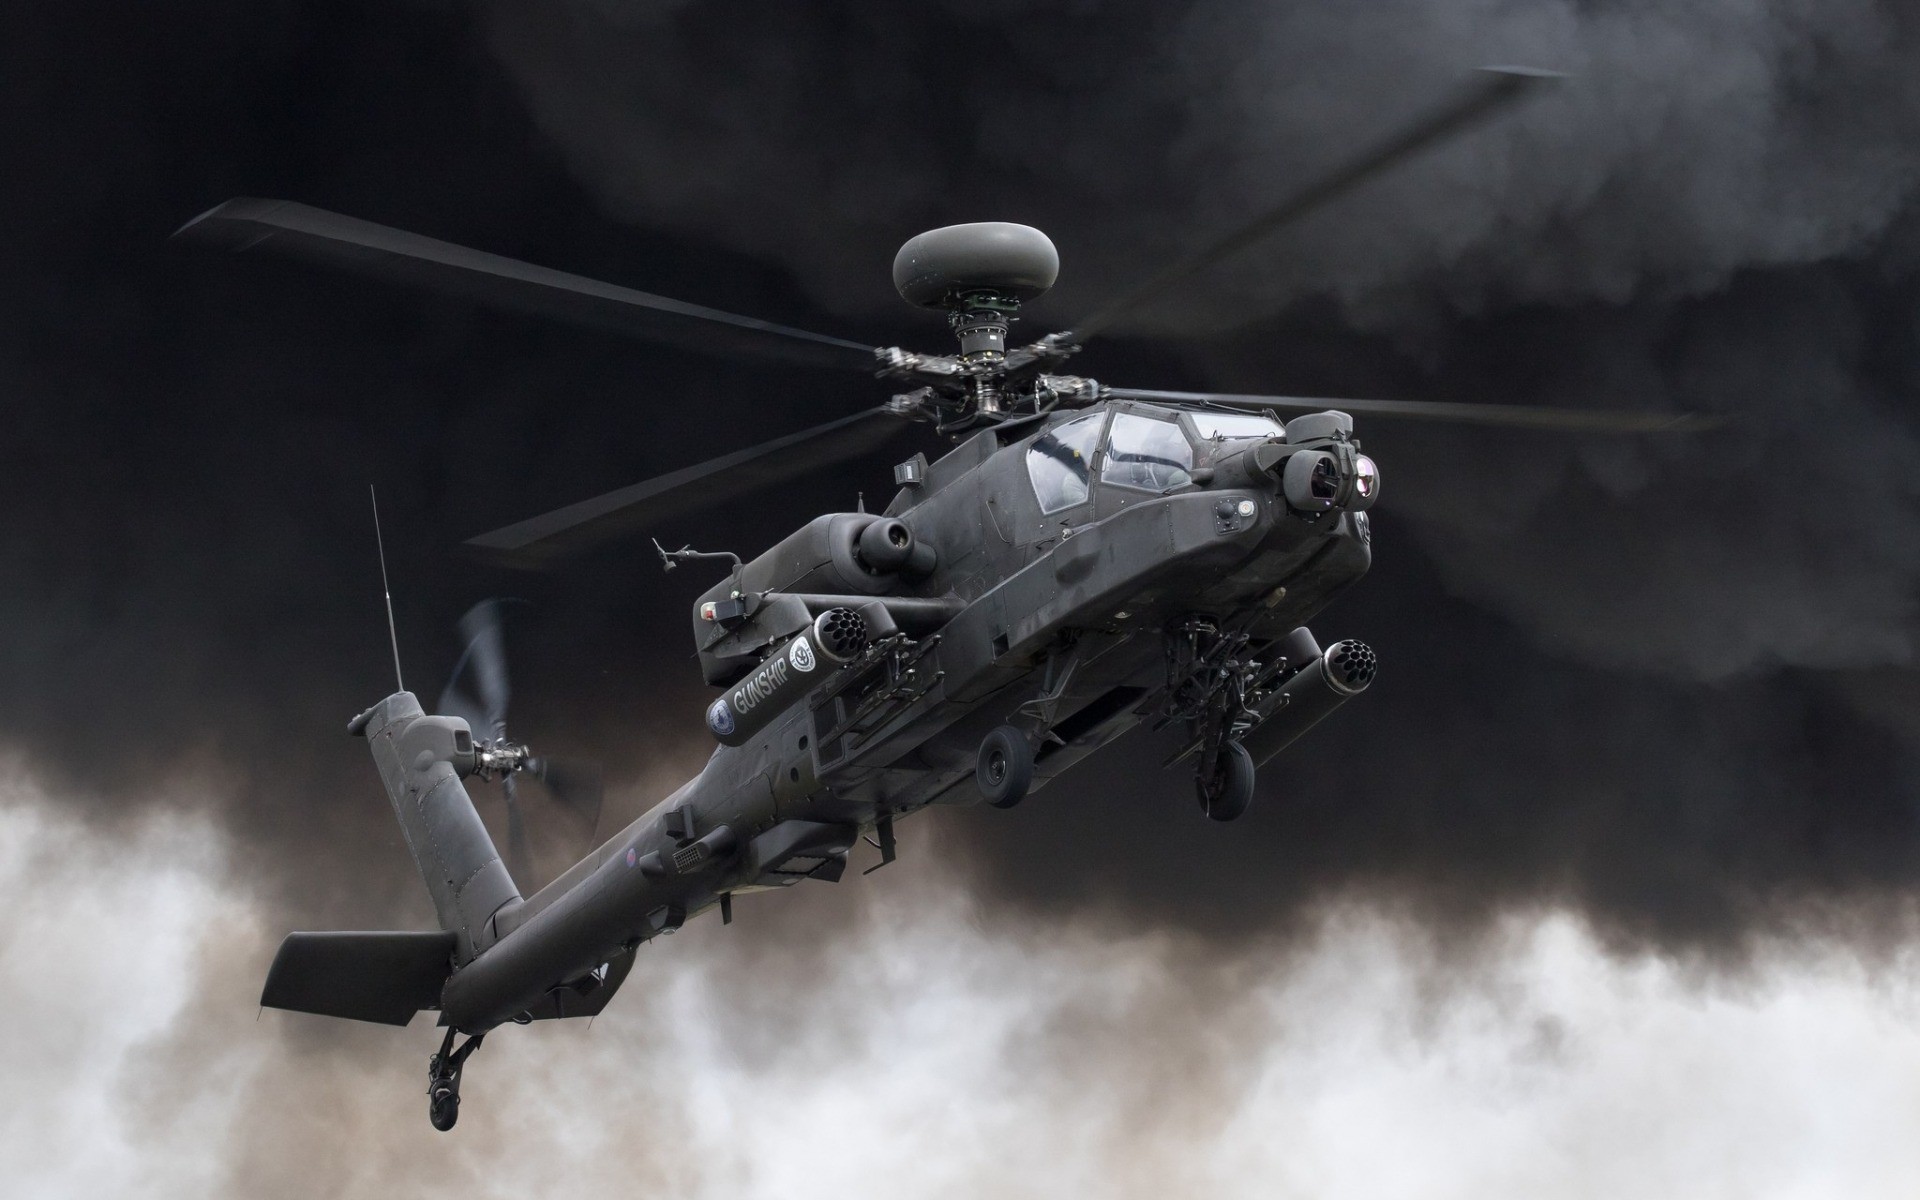 ah wallpaper,helicopter,rotorcraft,helicopter rotor,aircraft,military helicopter